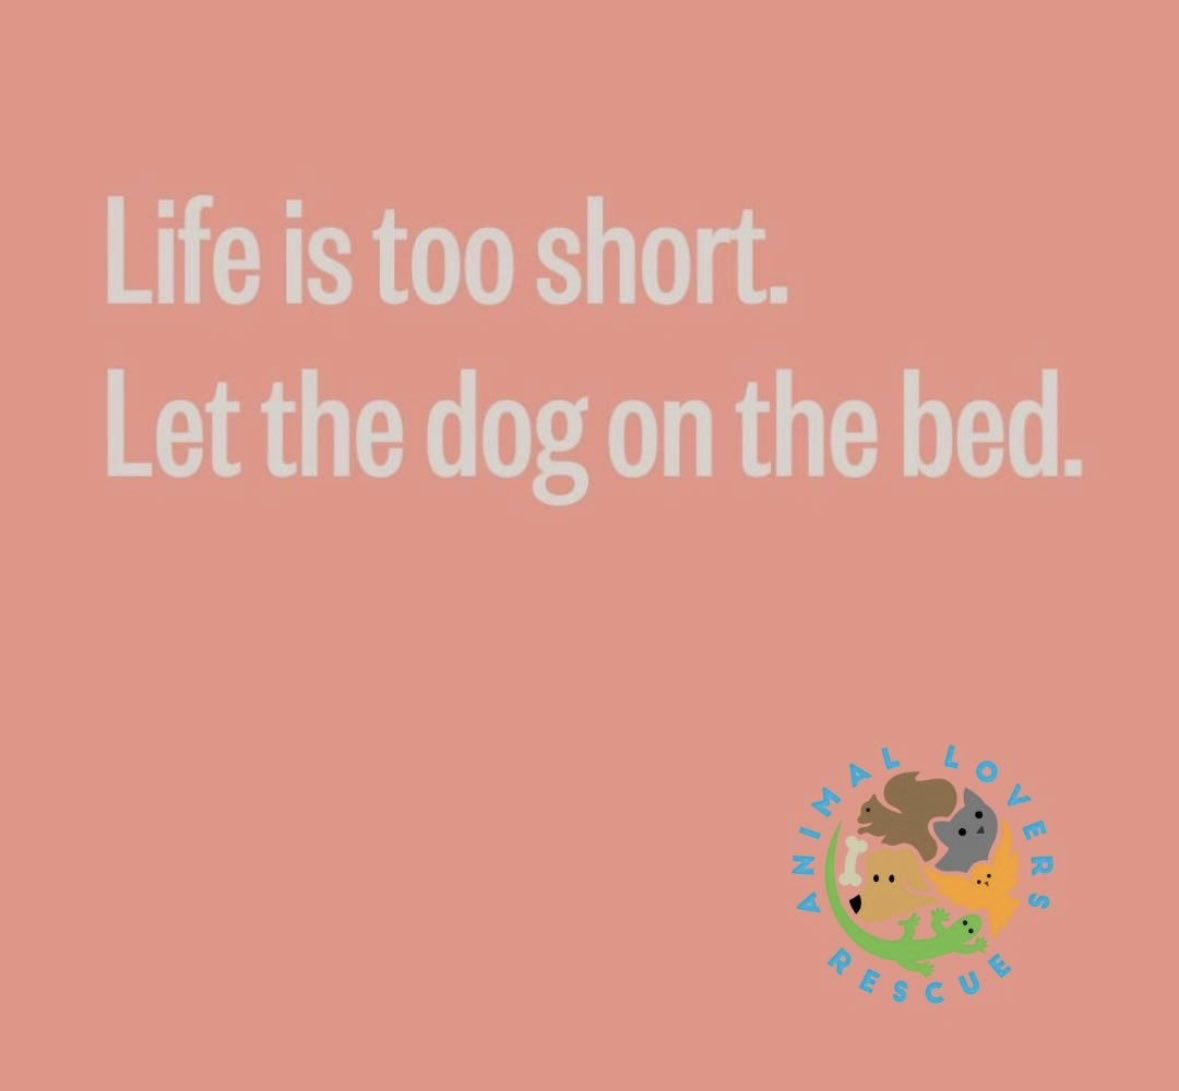 YOLO! 🐶🐾 #happytuesday DM us to adopt any of our available pets!🫶🏽#AnimalLoverRescue #rescuestory #animalrescue #adoptdontshop #rescue #animals #animallovers #animalsanctuary #animalrights #dogs #cats #rescuedog #kittenrescue #fosteringsaveslives #adoptme #adoption